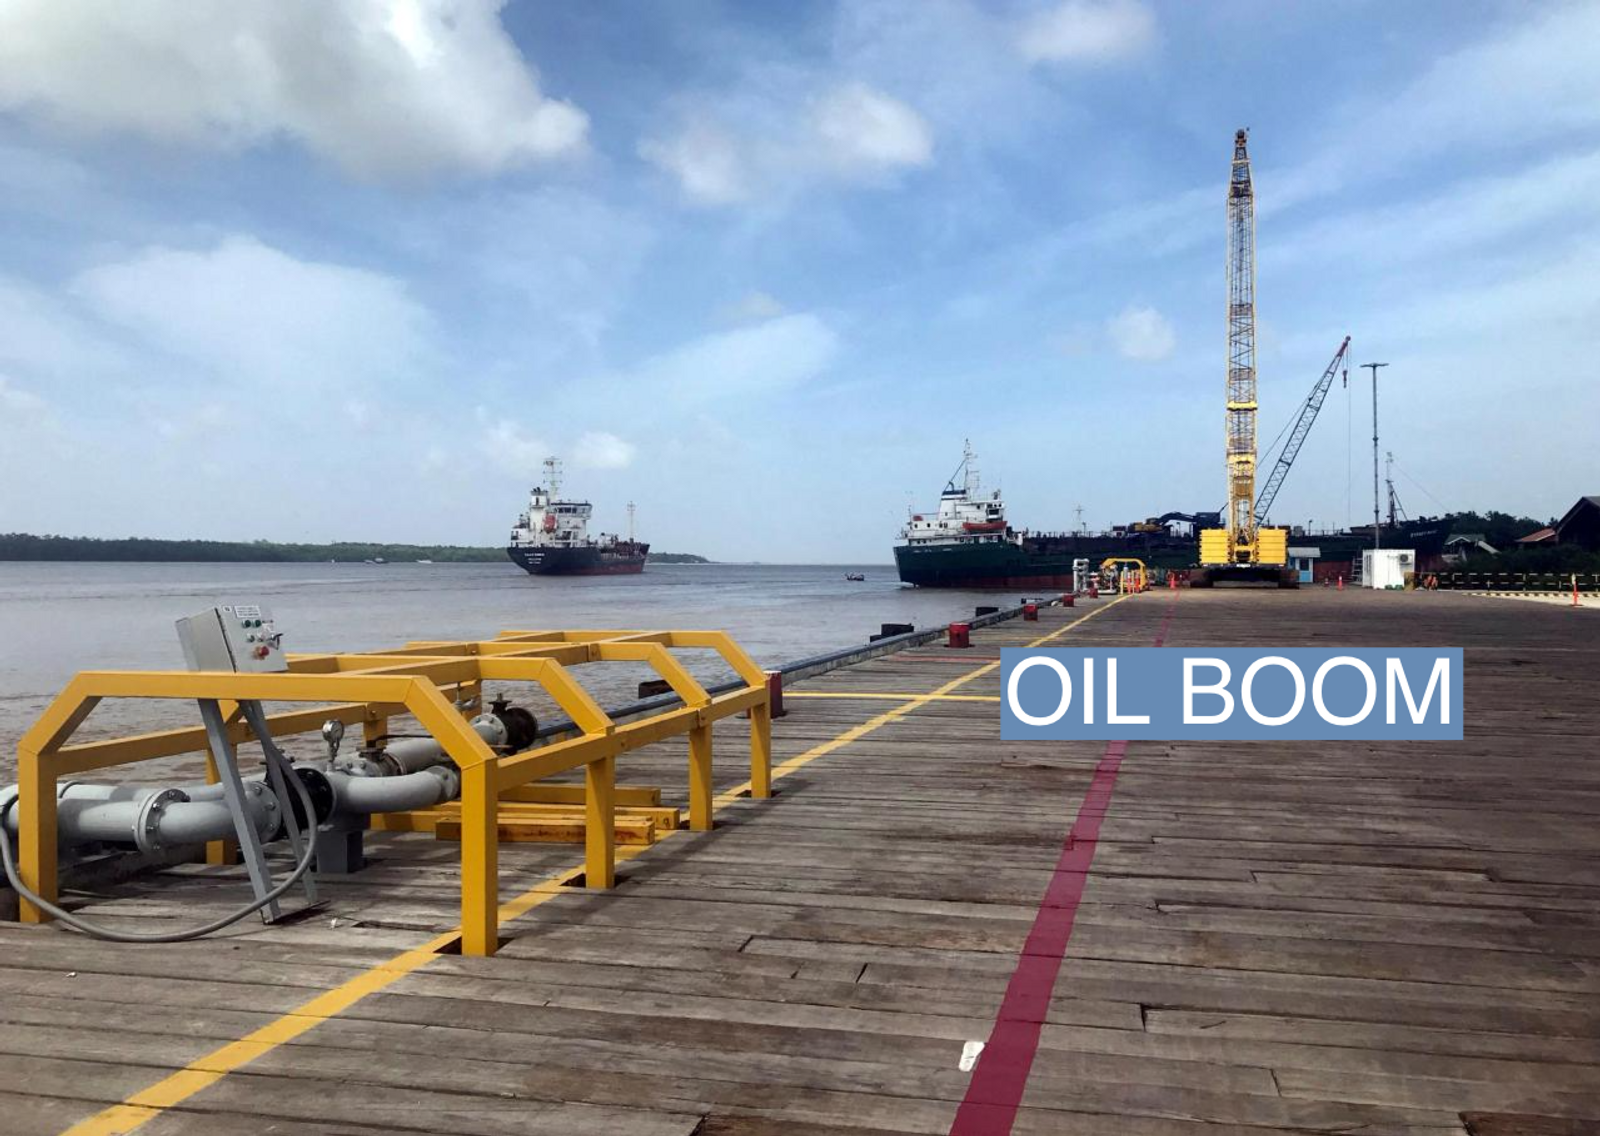 Vessels carrying supplies for an offshore oil platform operated by Exxon Mobil are seen at the Guyana Shore Base Inc wharf on the Demerara River, south of Georgetown, Guyana January 23, 2020. REUTERS/Luc Cohen/File Photo